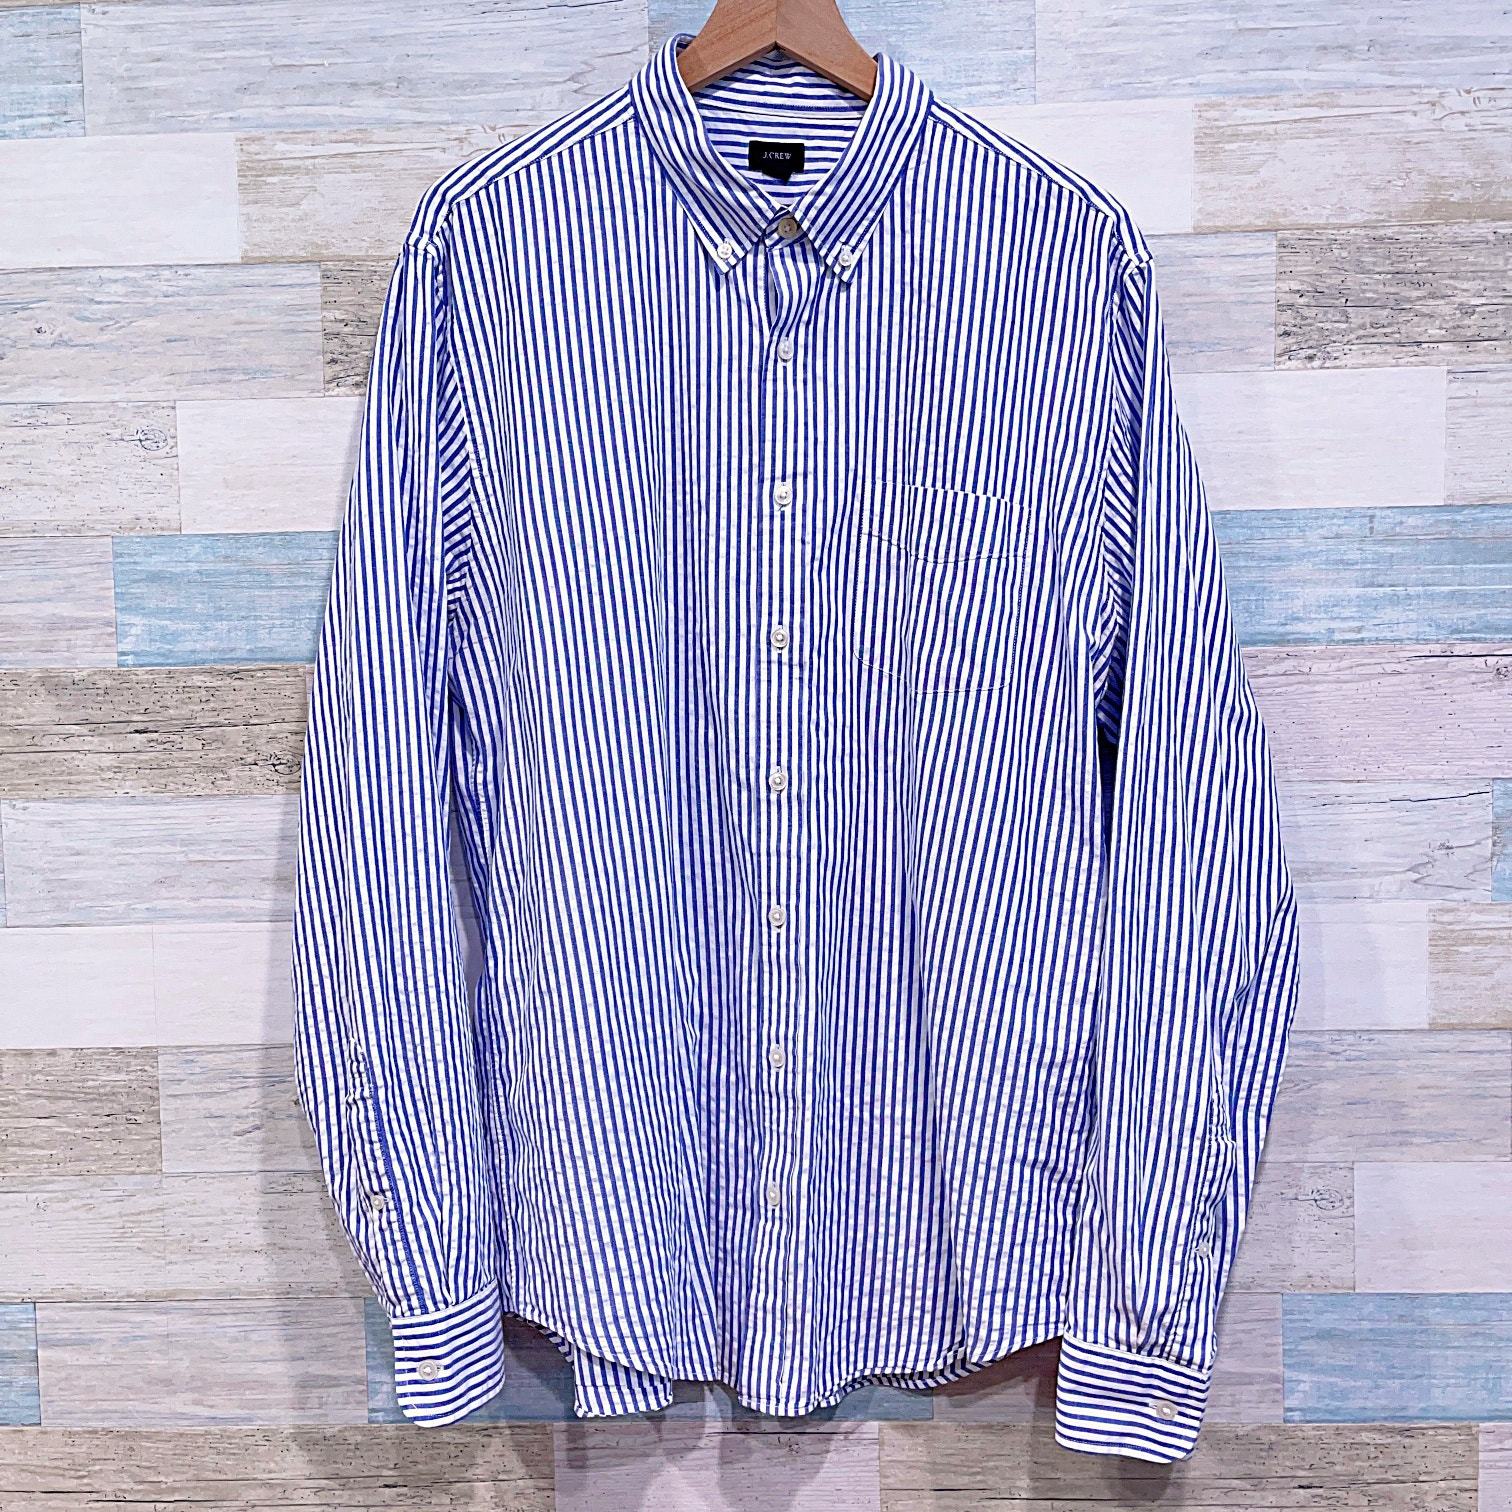 Primary image for J Crew Striped Oxford Shirt Blue White Long Sleeve Button Down Cotton Mens XLT